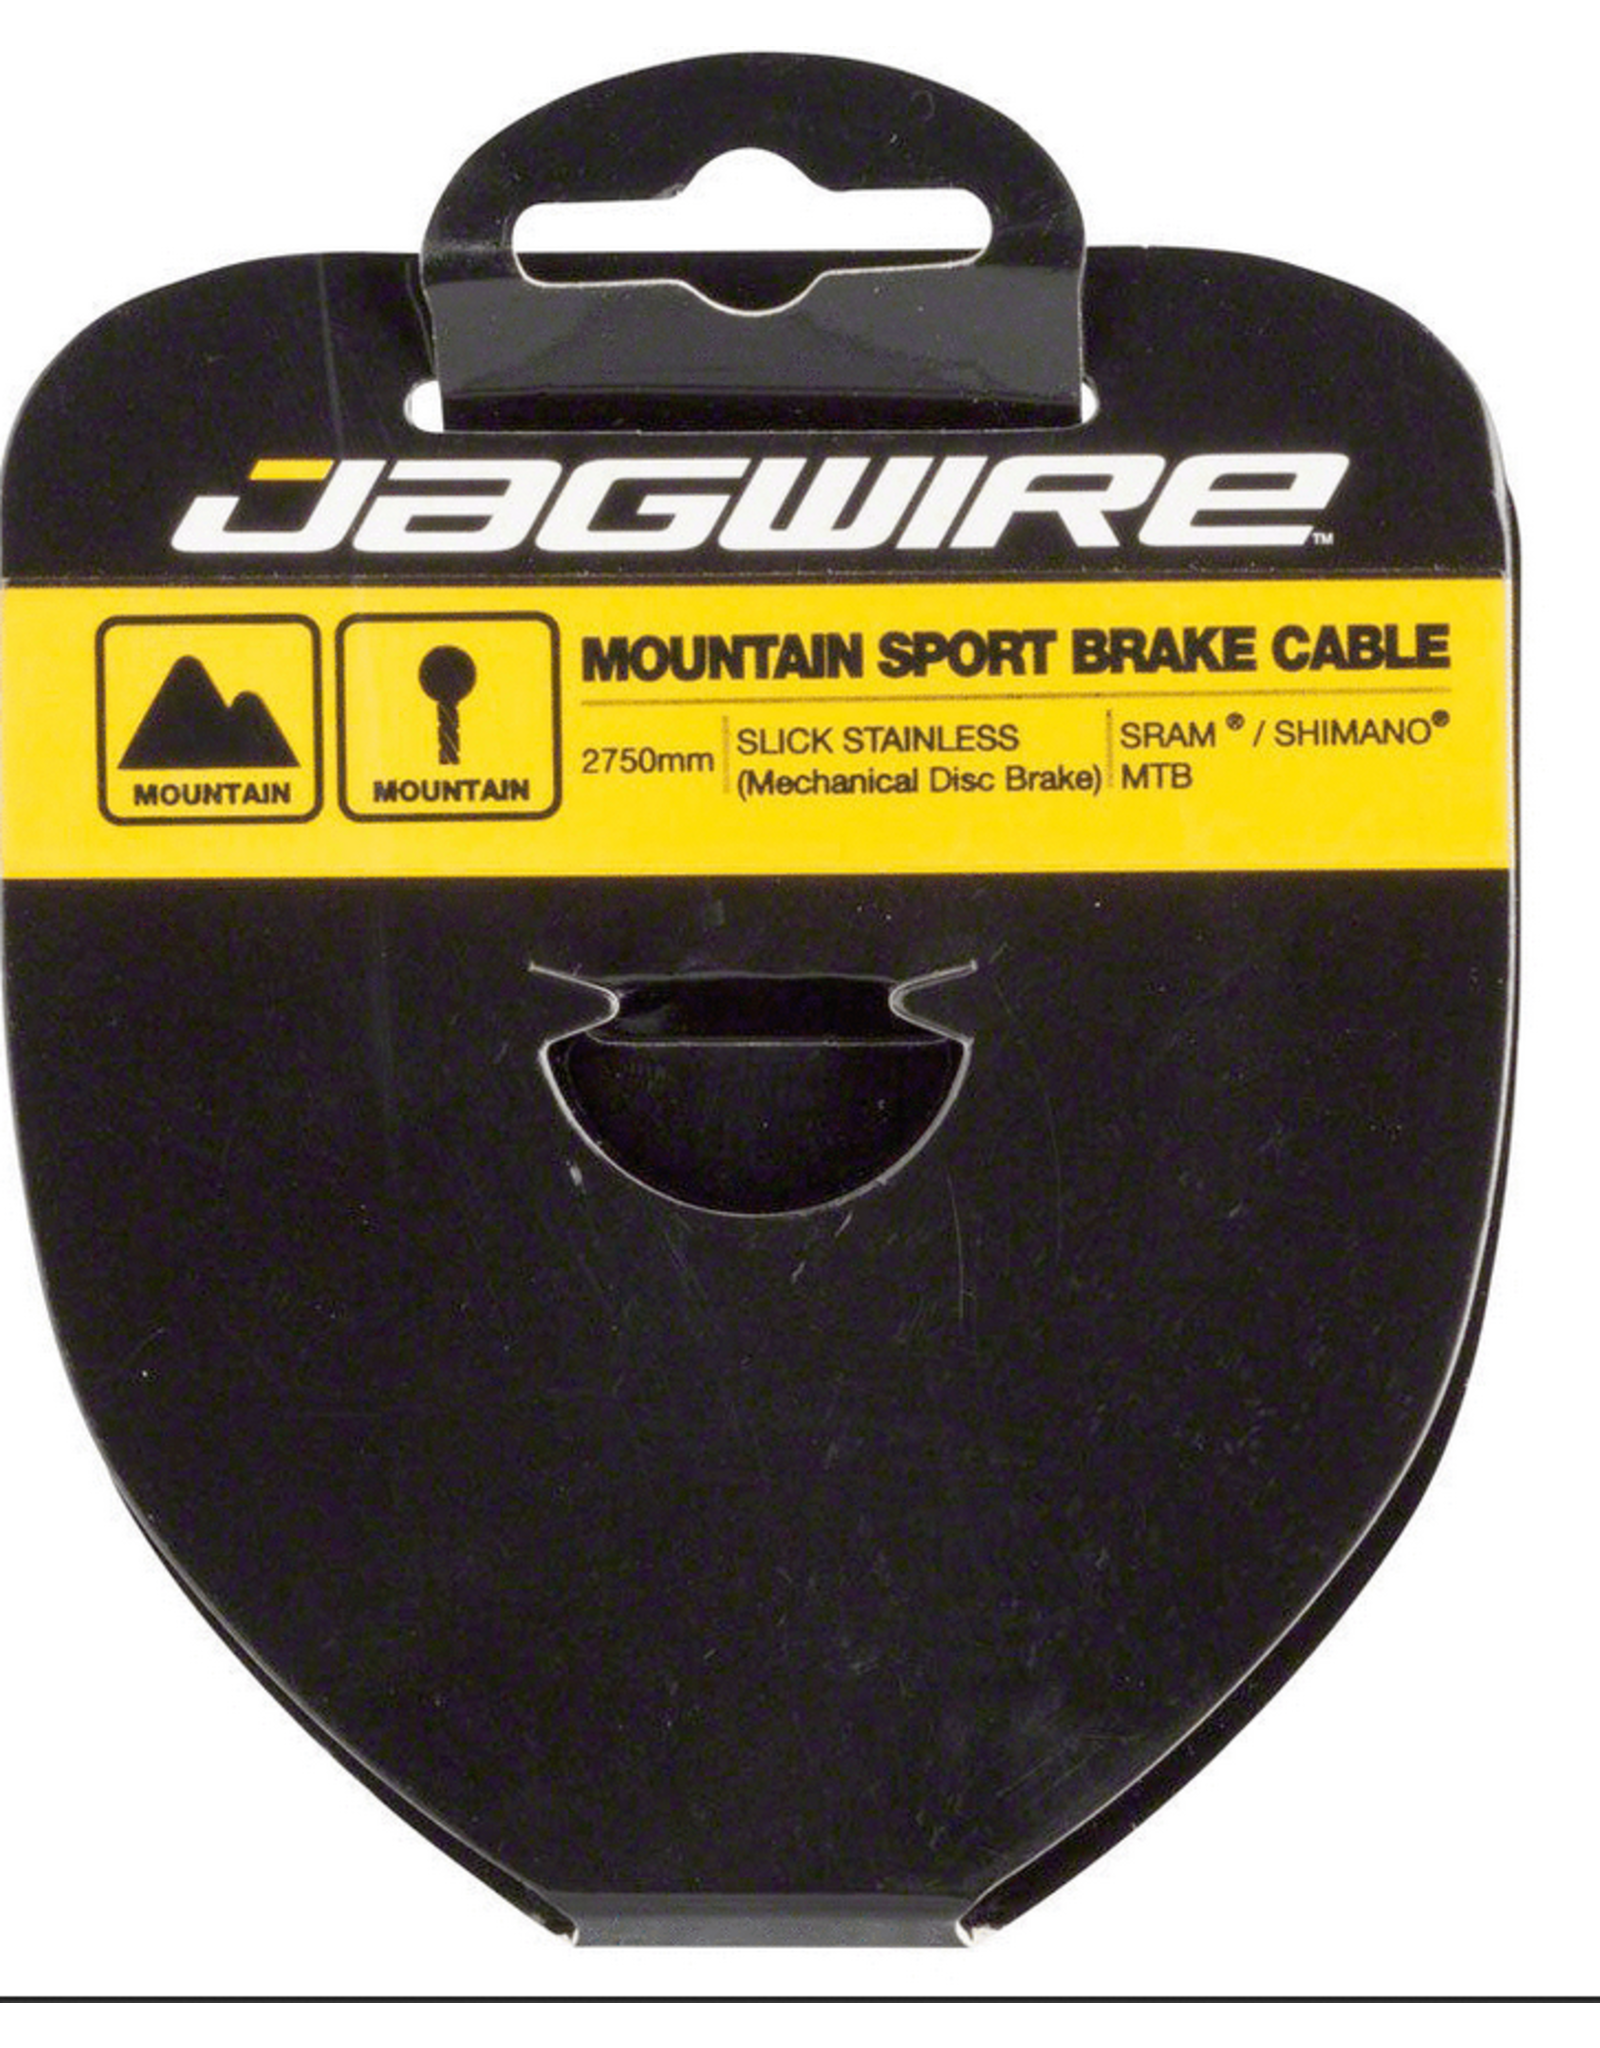 Jagwire Mountain Sport Slick Stainless Brake Cable - Natural